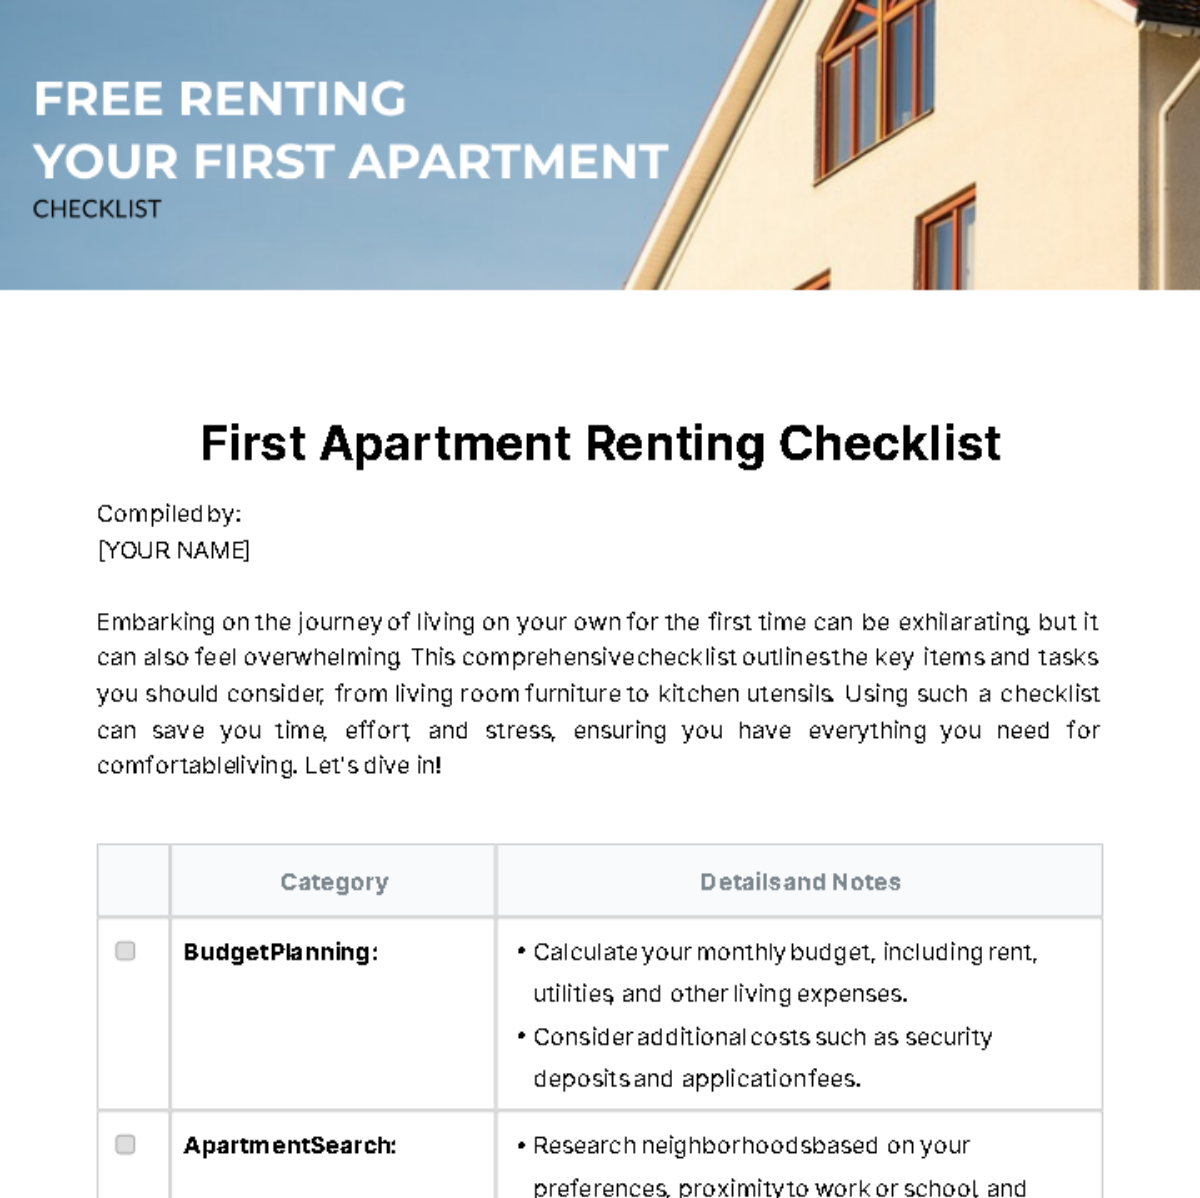 Free Renting Your First Apartment Checklist Template